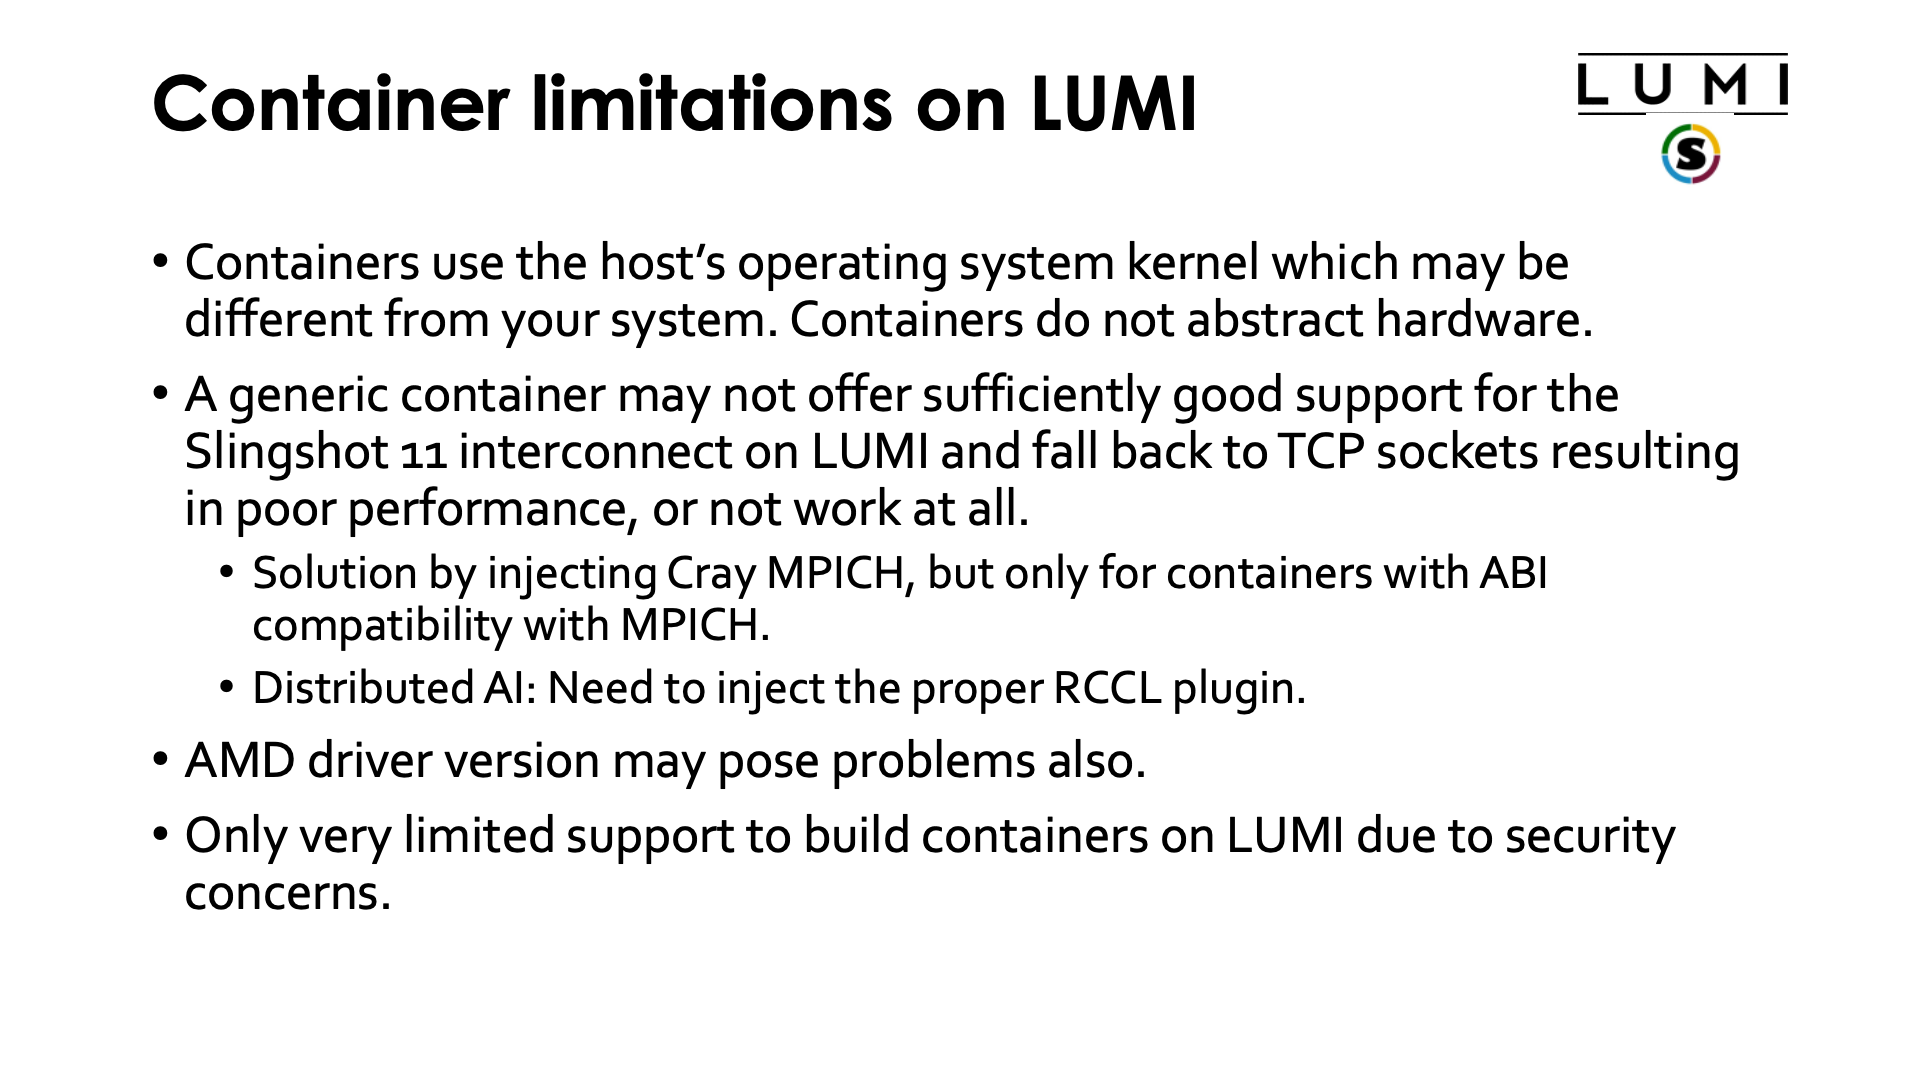 Container limitations on LUMI